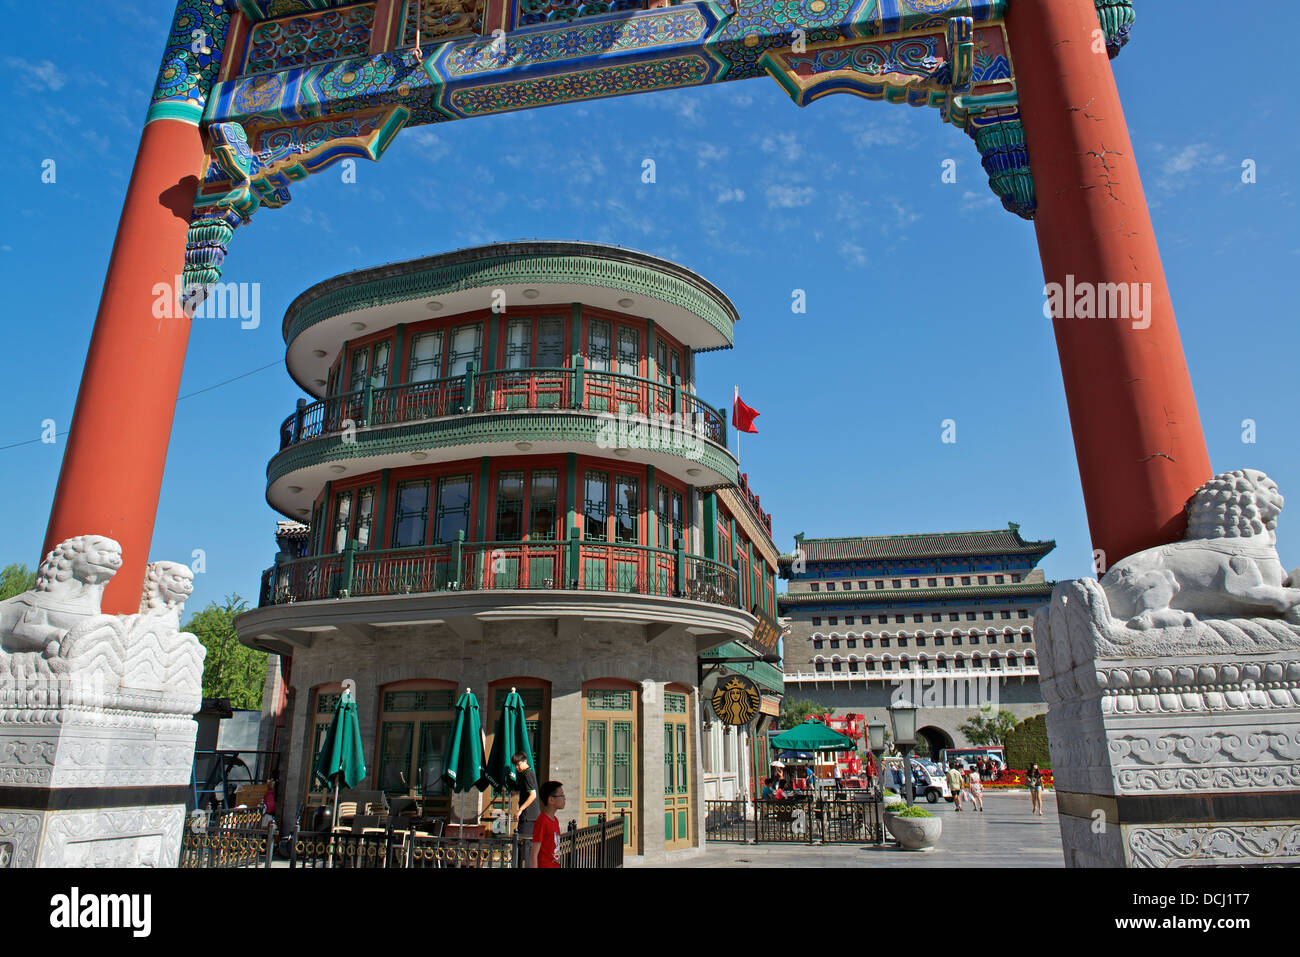 A Starbucks Coffeehouse at Qianmen Street in Beijing, China. 2013 Stock Photo